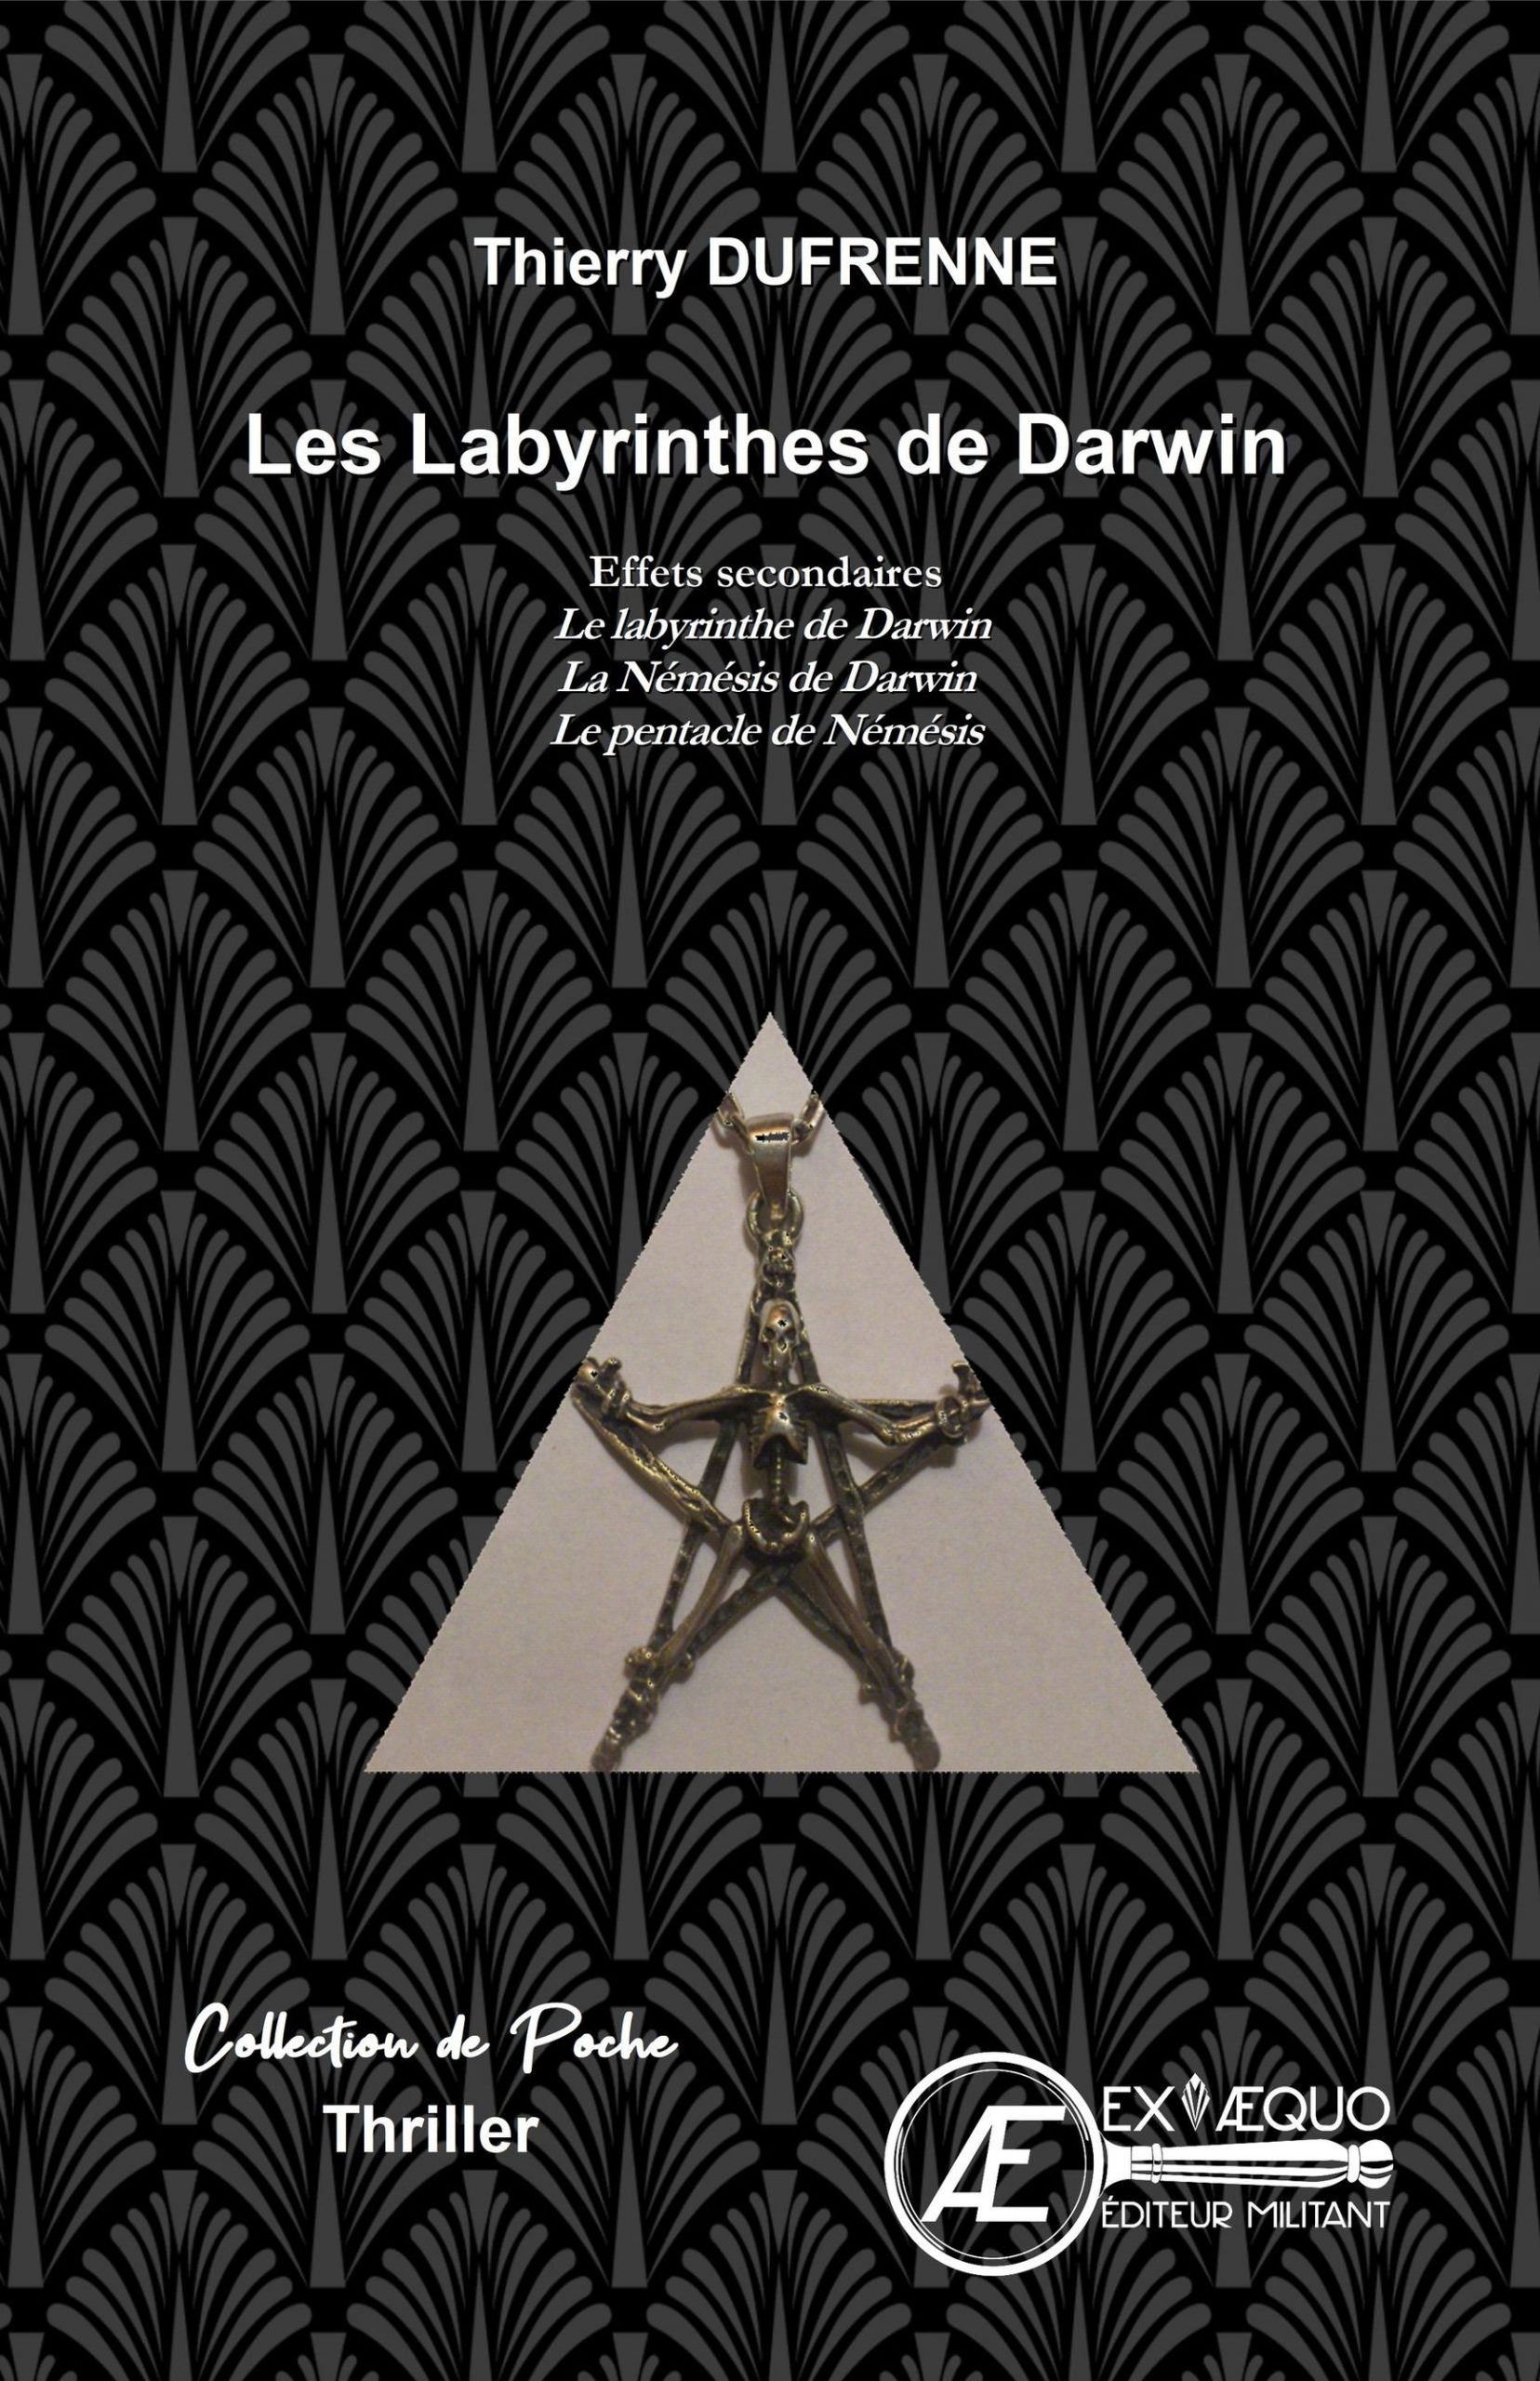 You are currently viewing Les Labyrinthes de Darwin, de Thierry Dufrenne